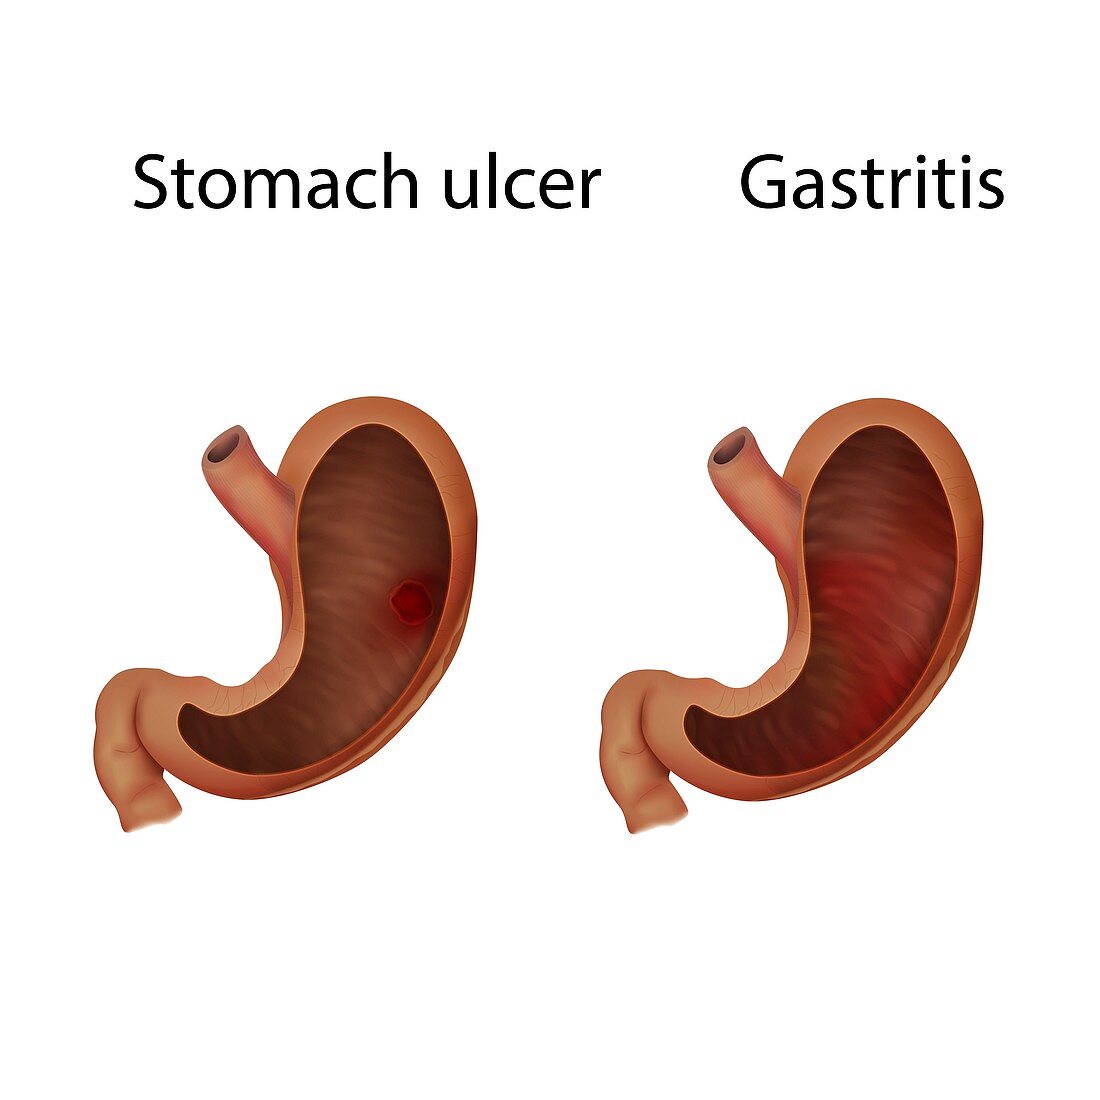 Gastritis and stomach ulcer, illustration